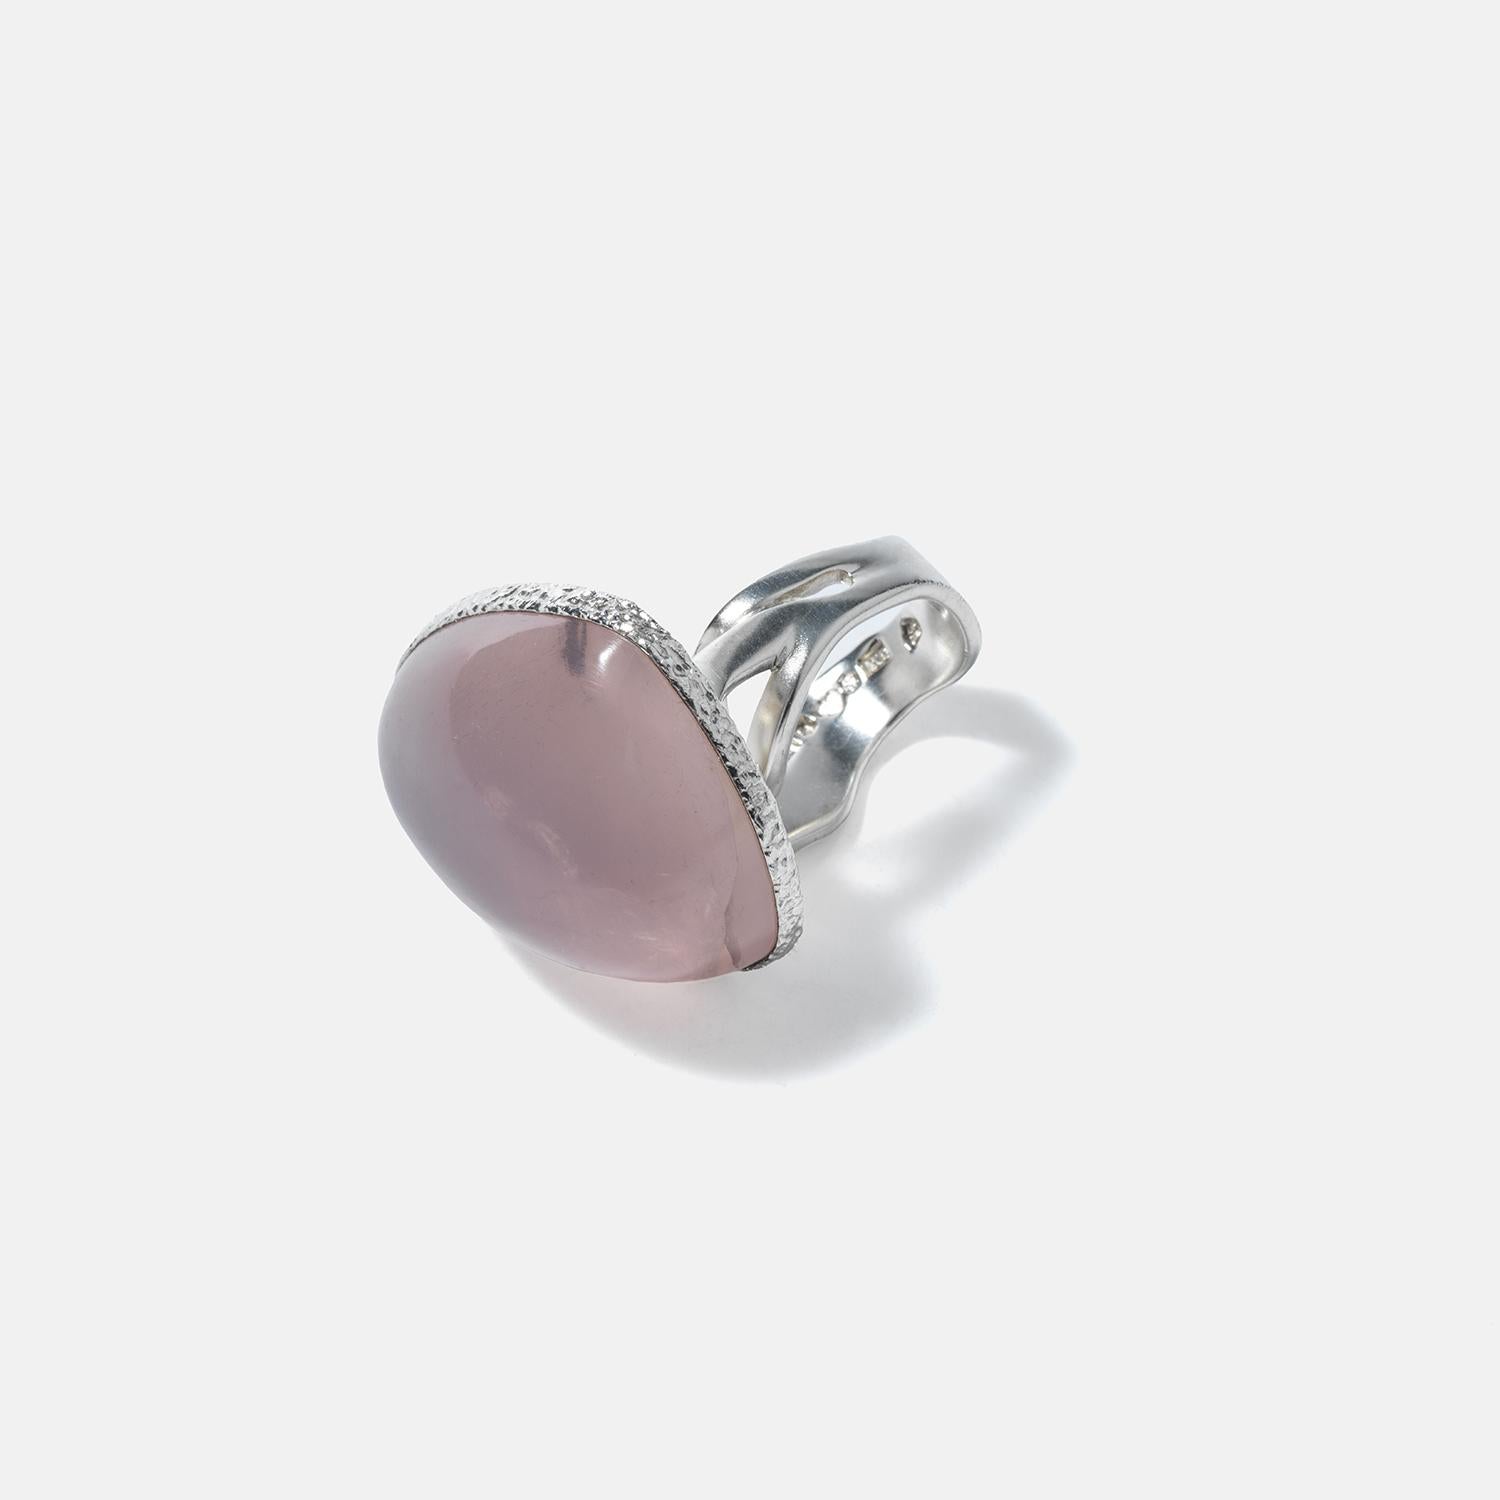 Women's or Men's Vintage Silver and Rose Quartz Ring by Swedish master Carl Forsberg Year 1973 For Sale